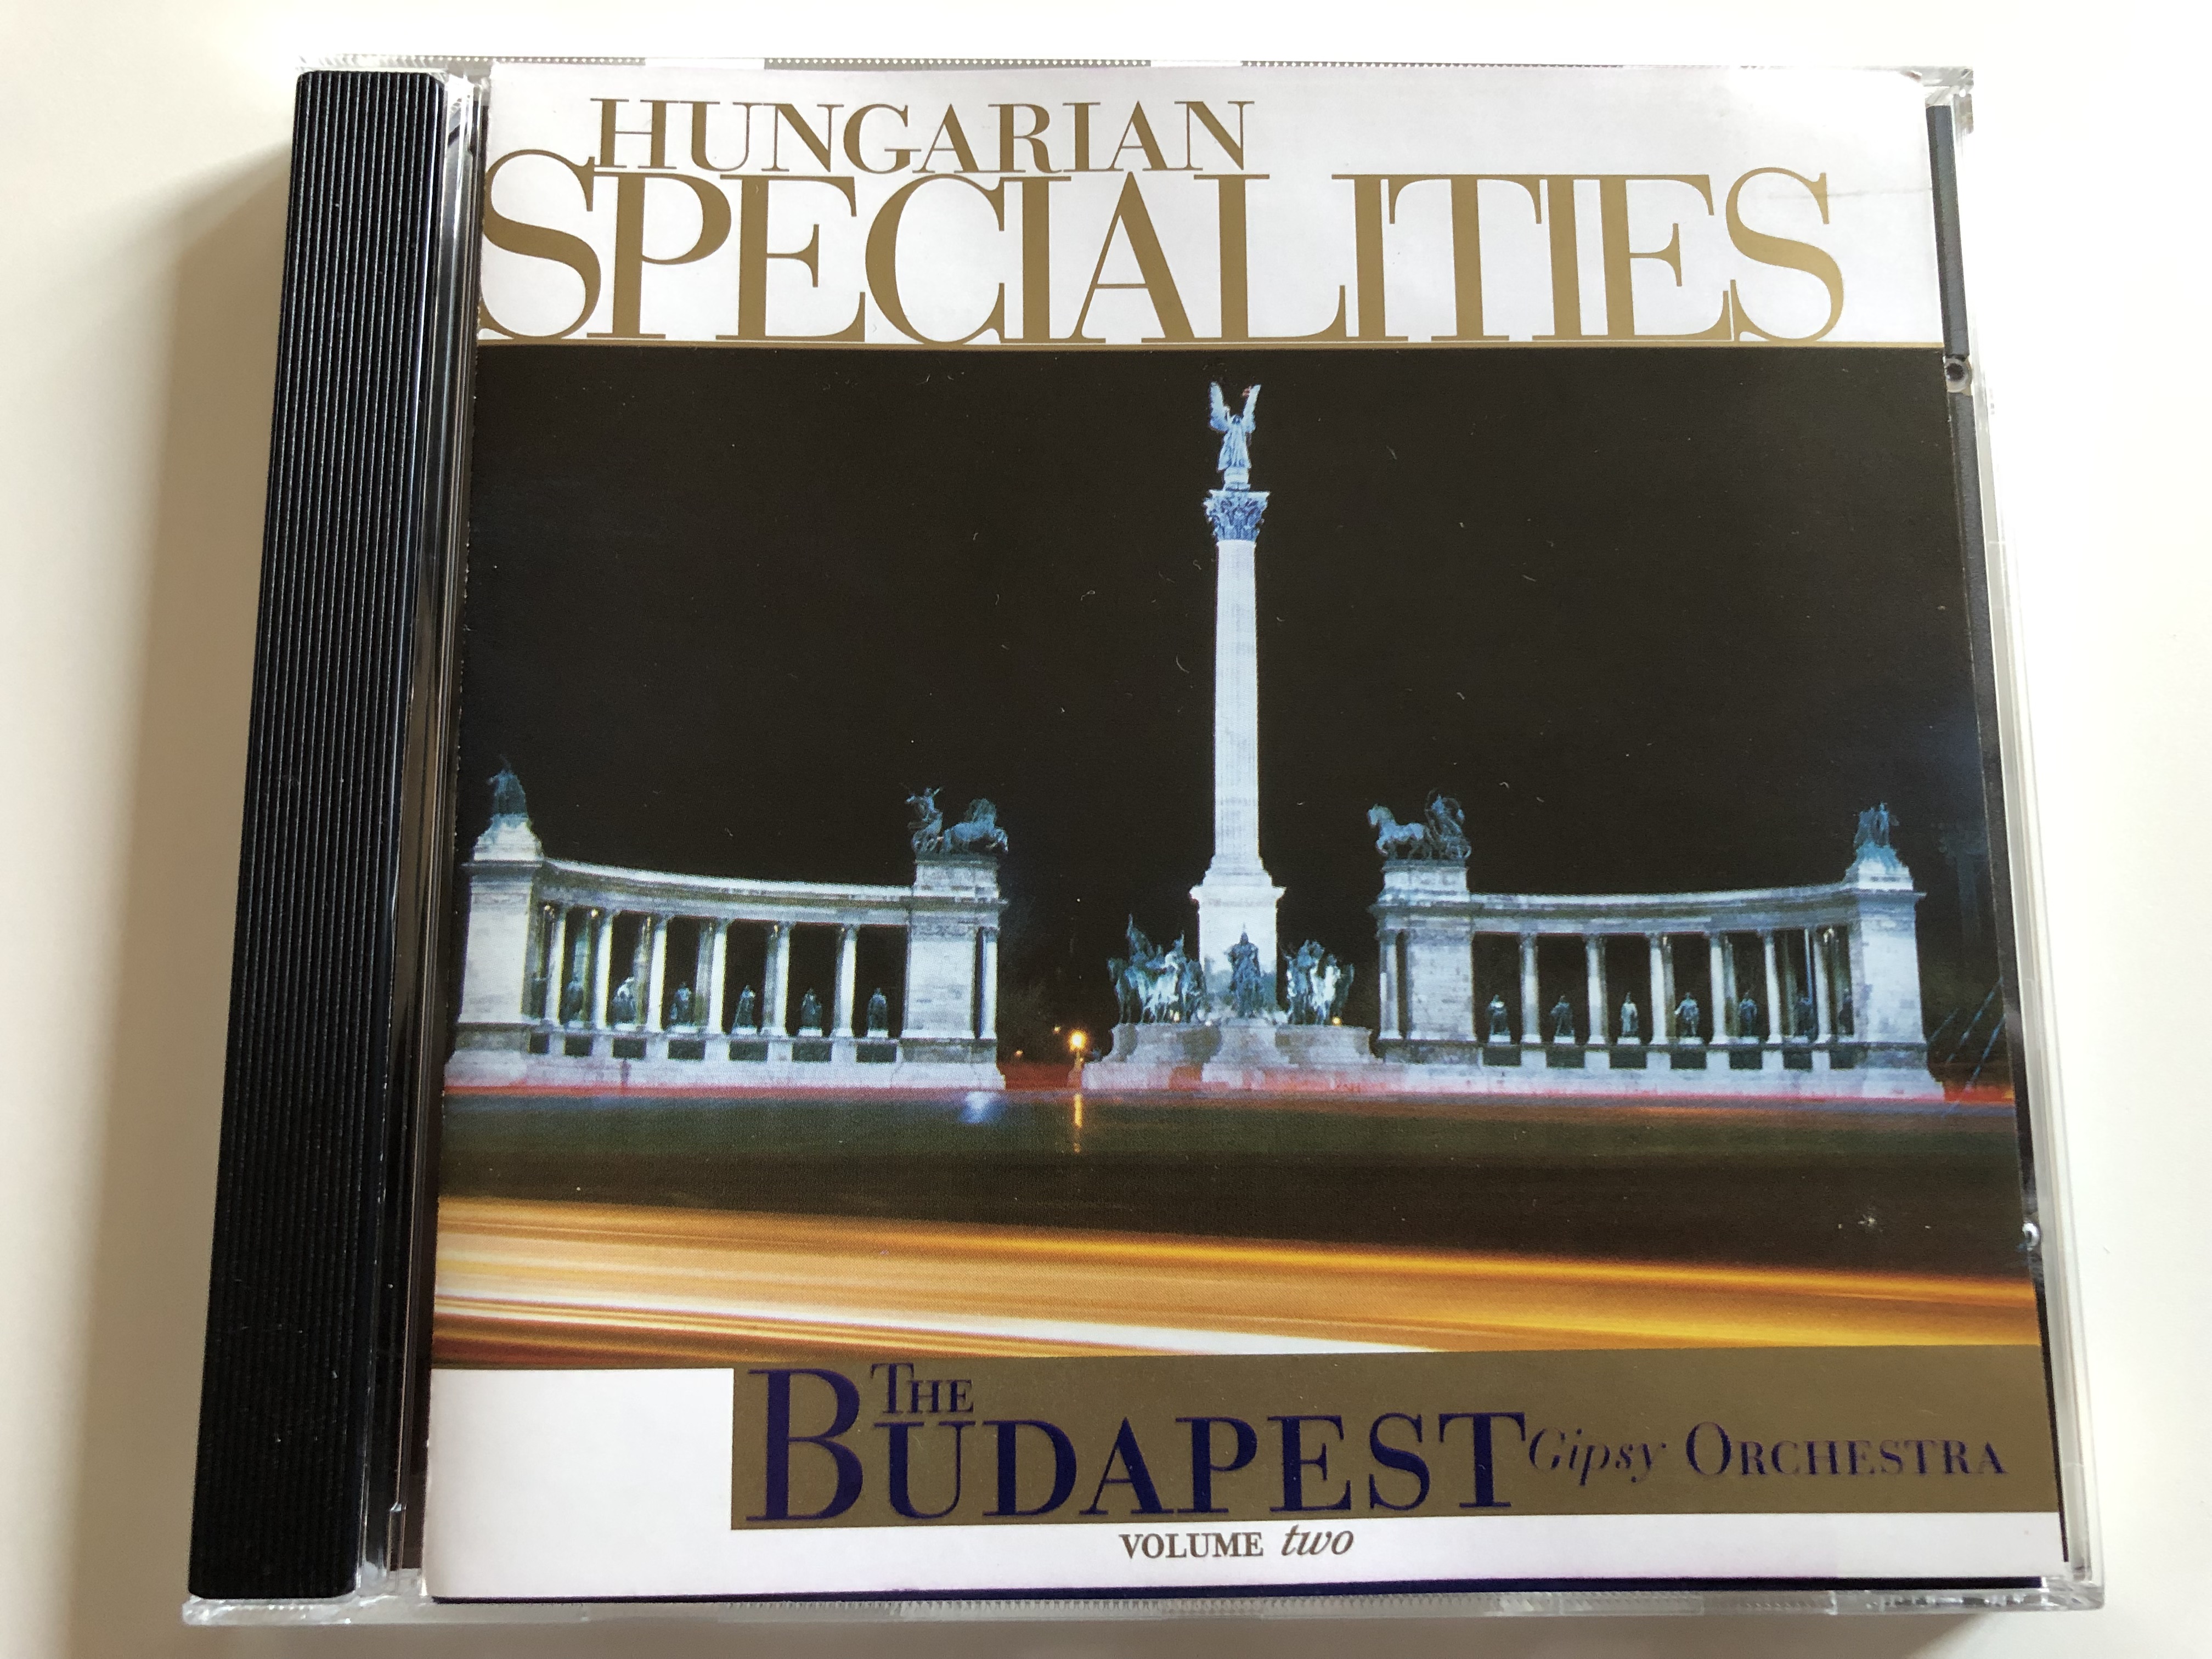 hungarian-specialities-the-budapest-gipsy-orchestra-volume-two-music-express-classics-audio-cd-1999-mec-492-1-.jpg